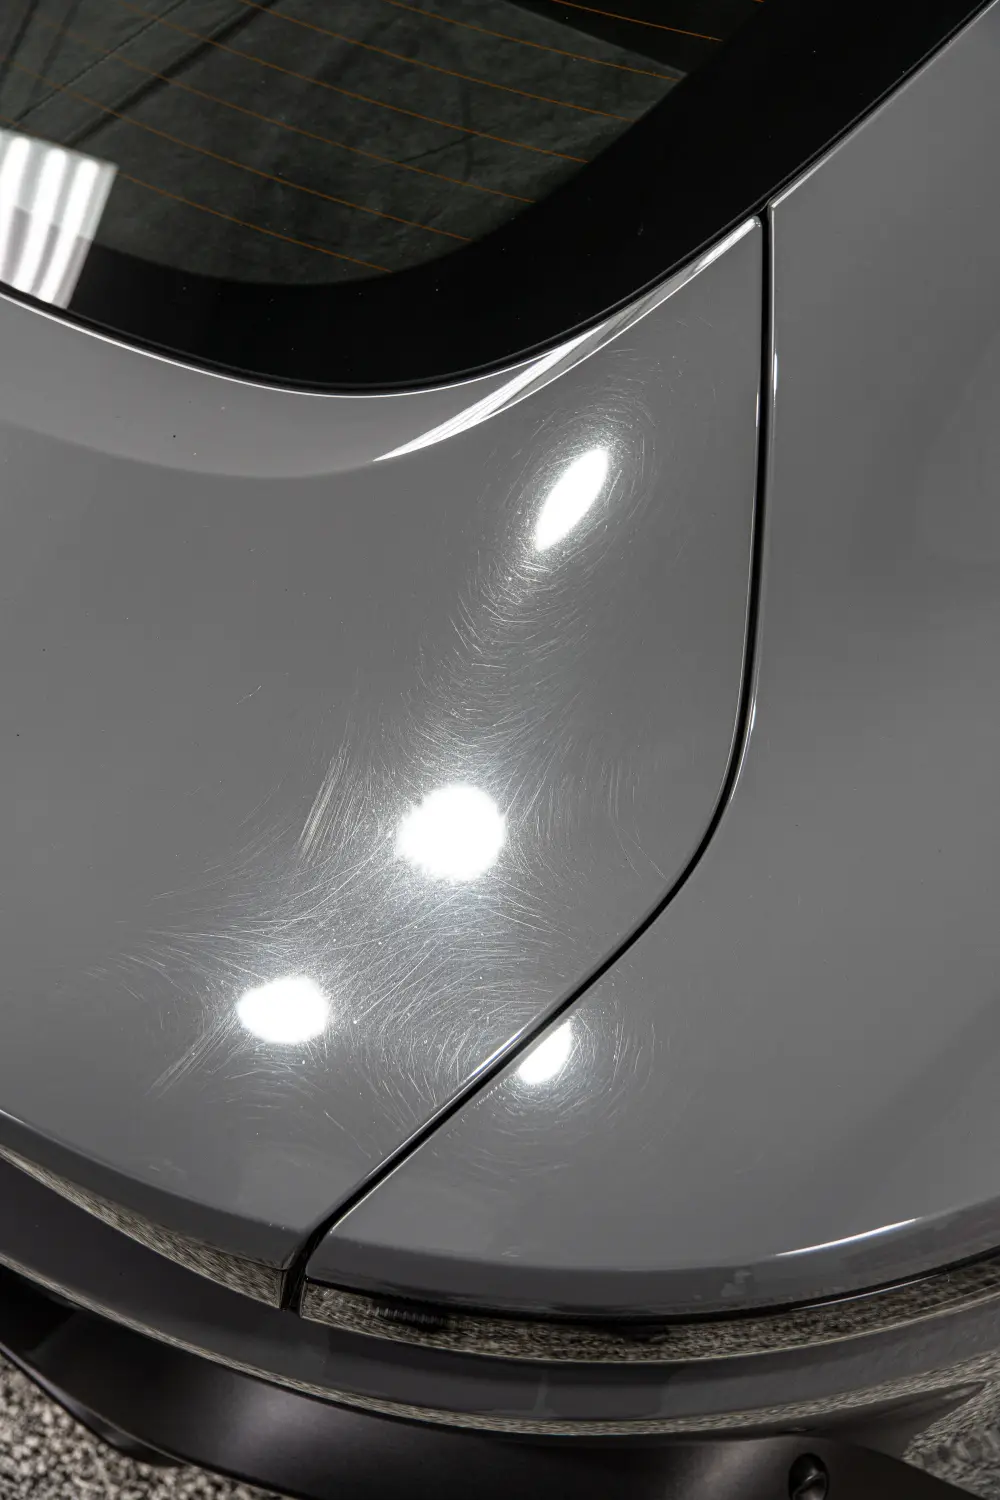 Aston Martin Luxury Vehicle Paint Correction and Ceramic Coating by Spud Suds